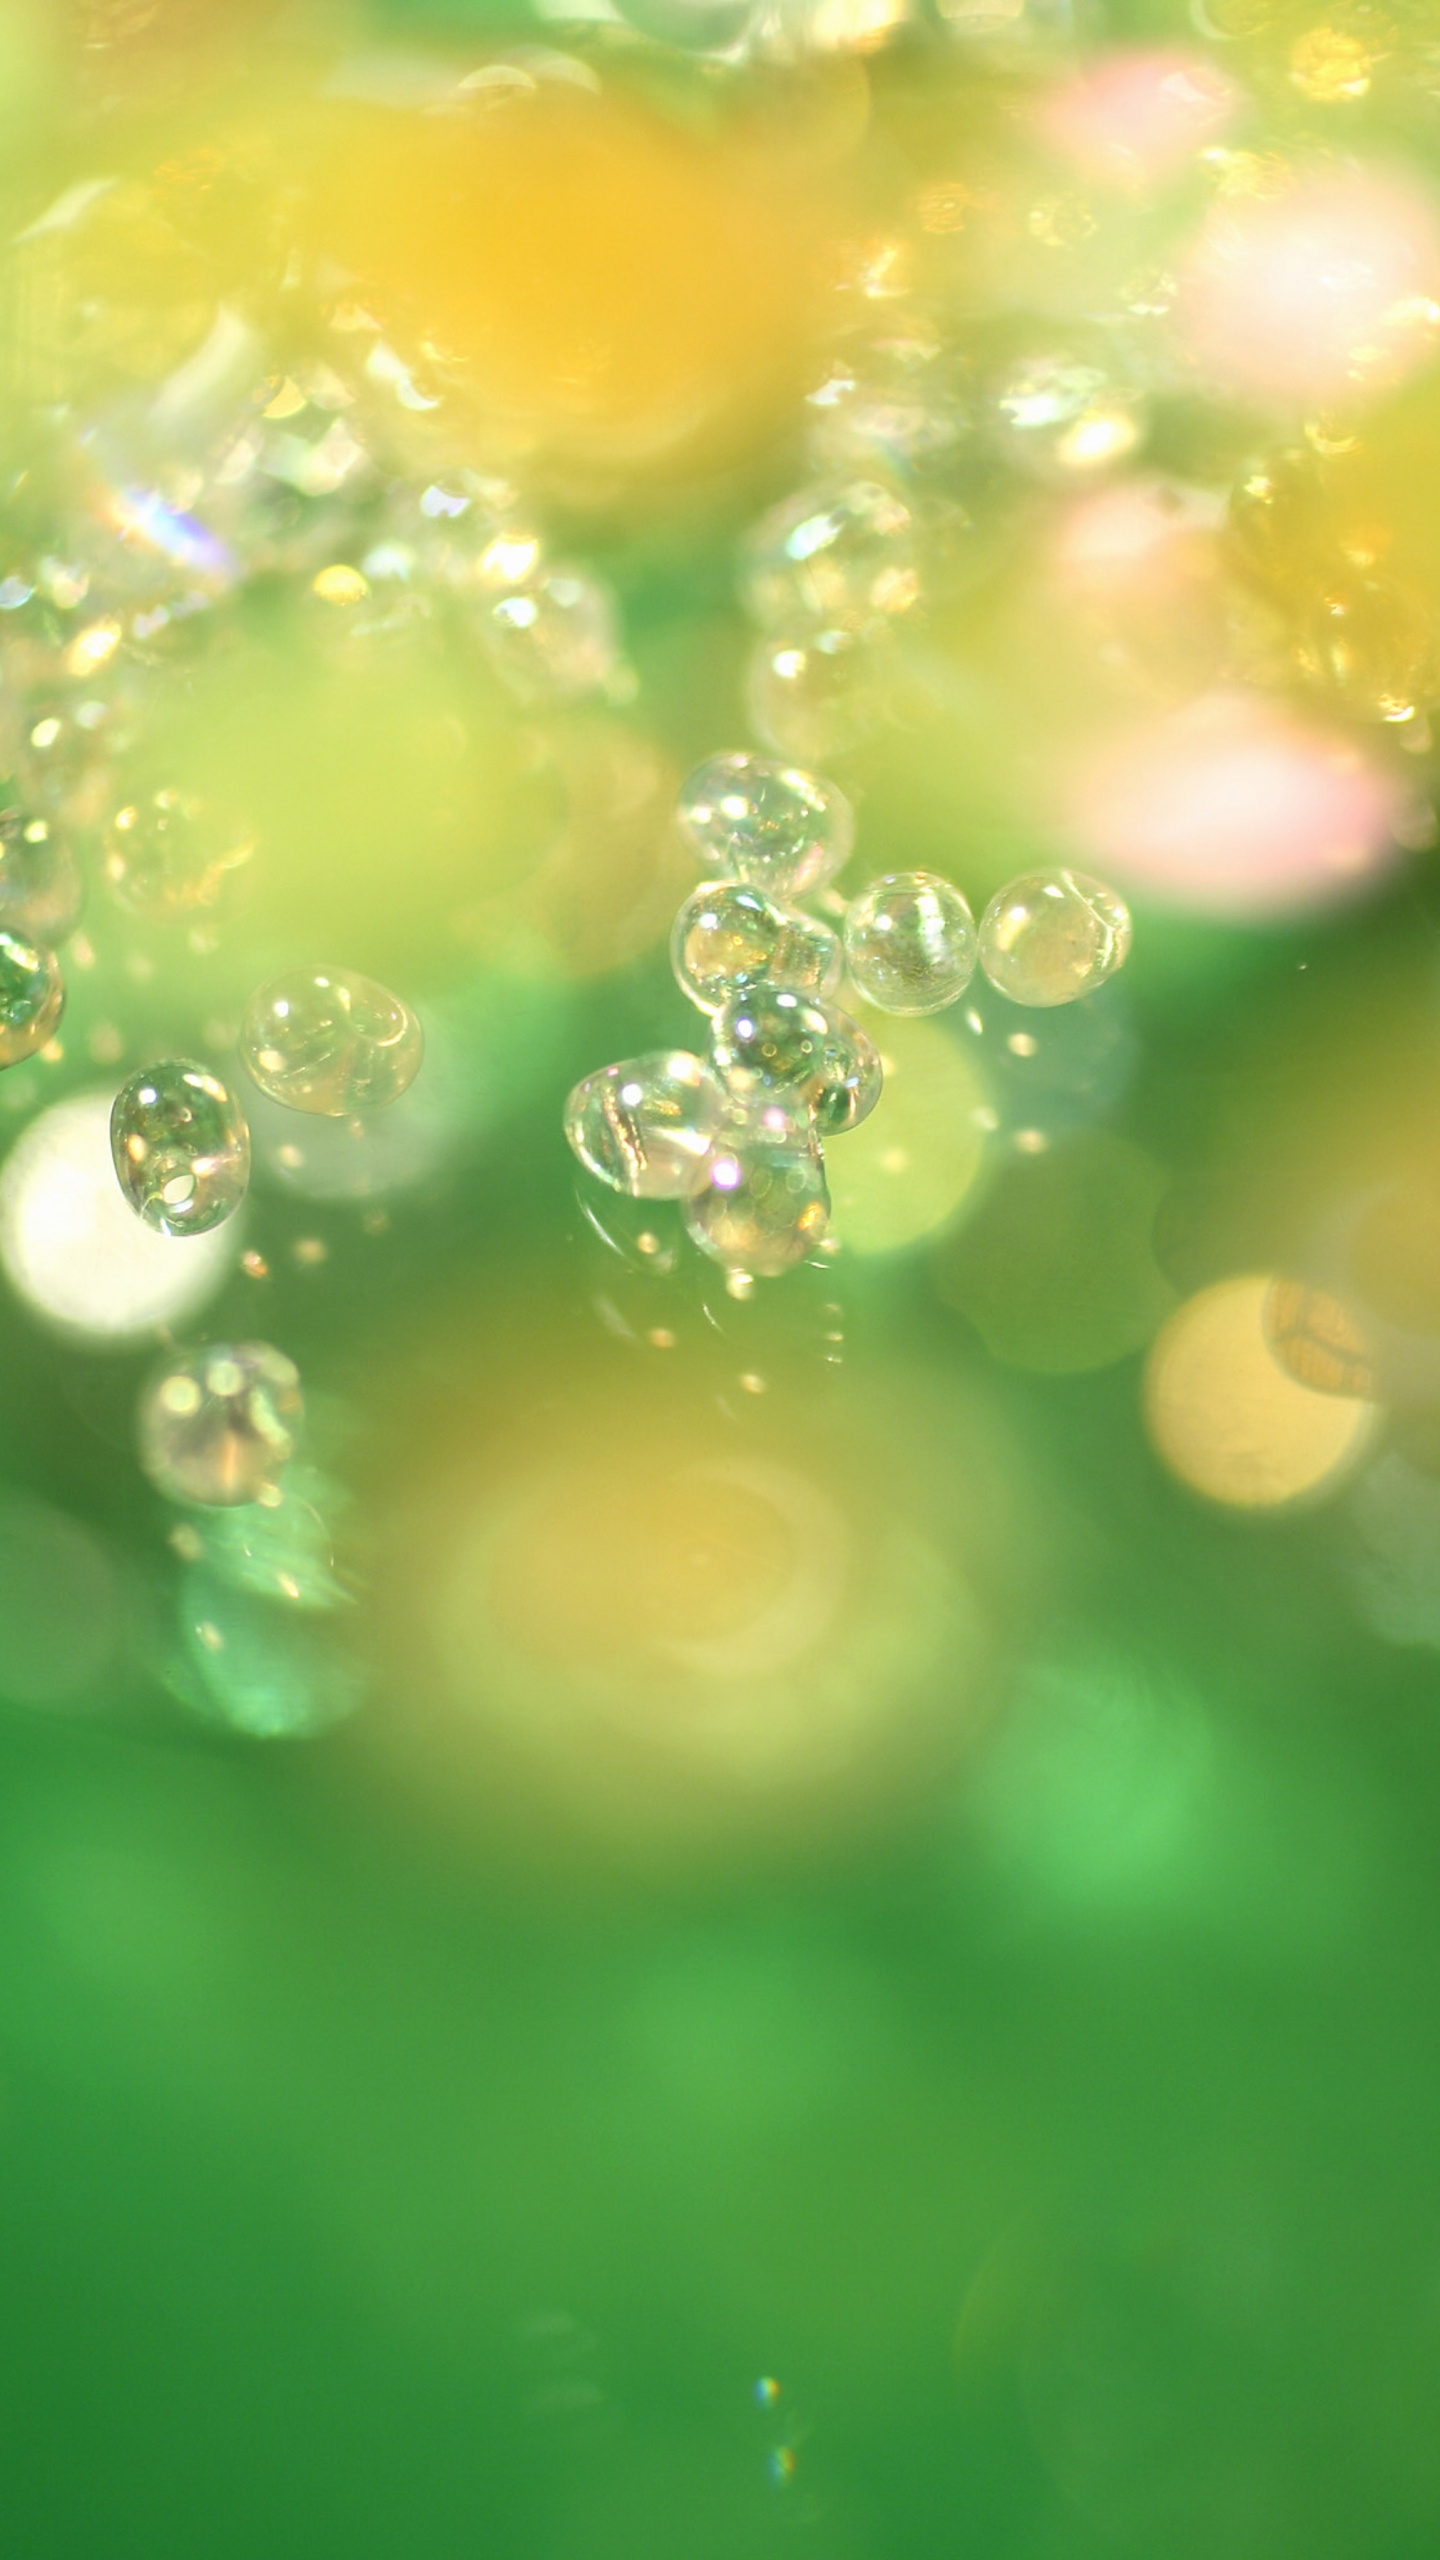 Water Droplets on Green Surface. Wallpaper in 1440x2560 Resolution